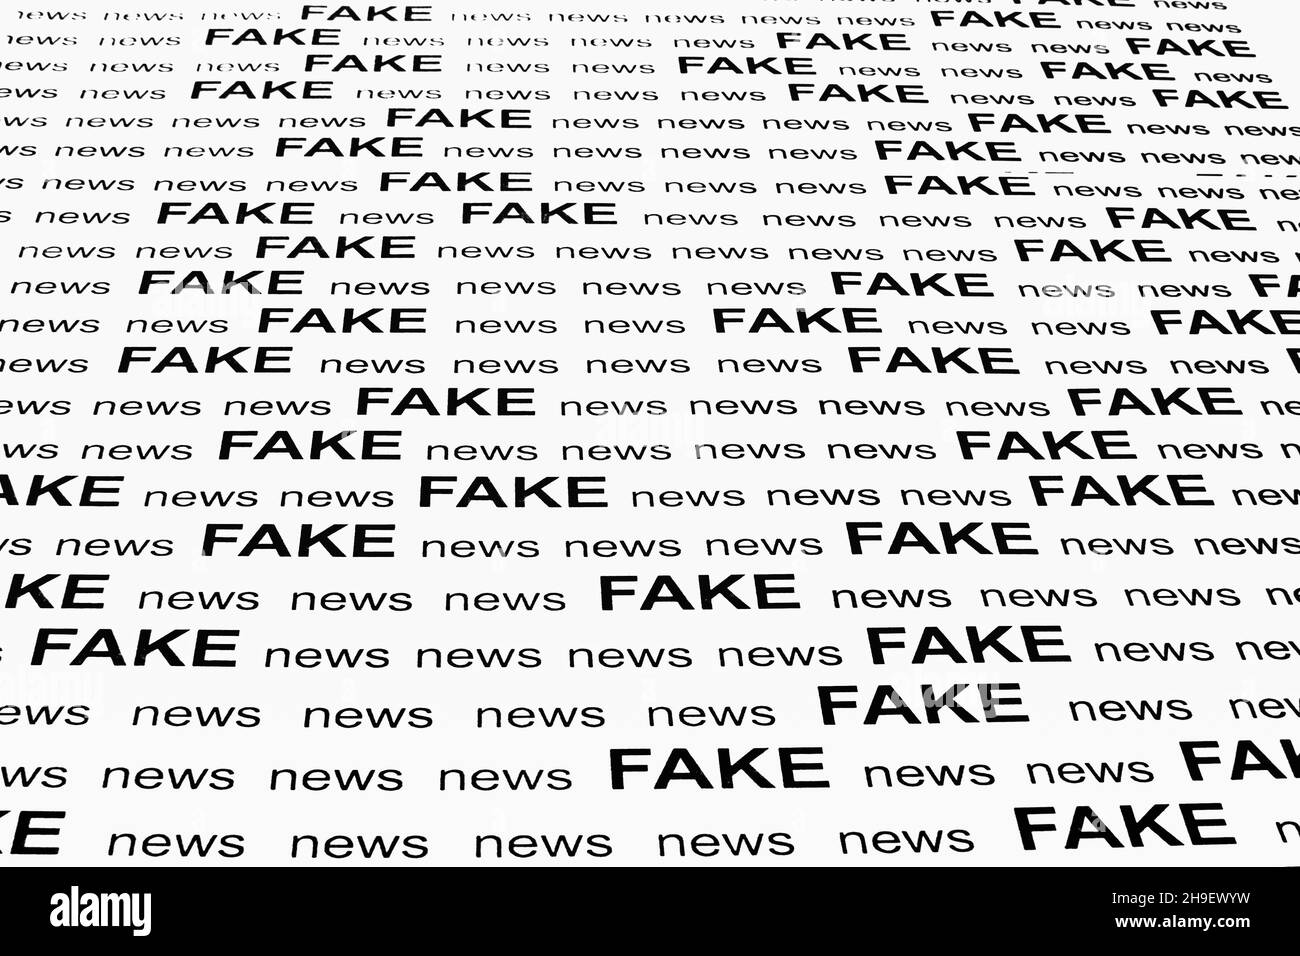 Text - FAKE news - printed on white sheet of paper in black and white Stock Photo